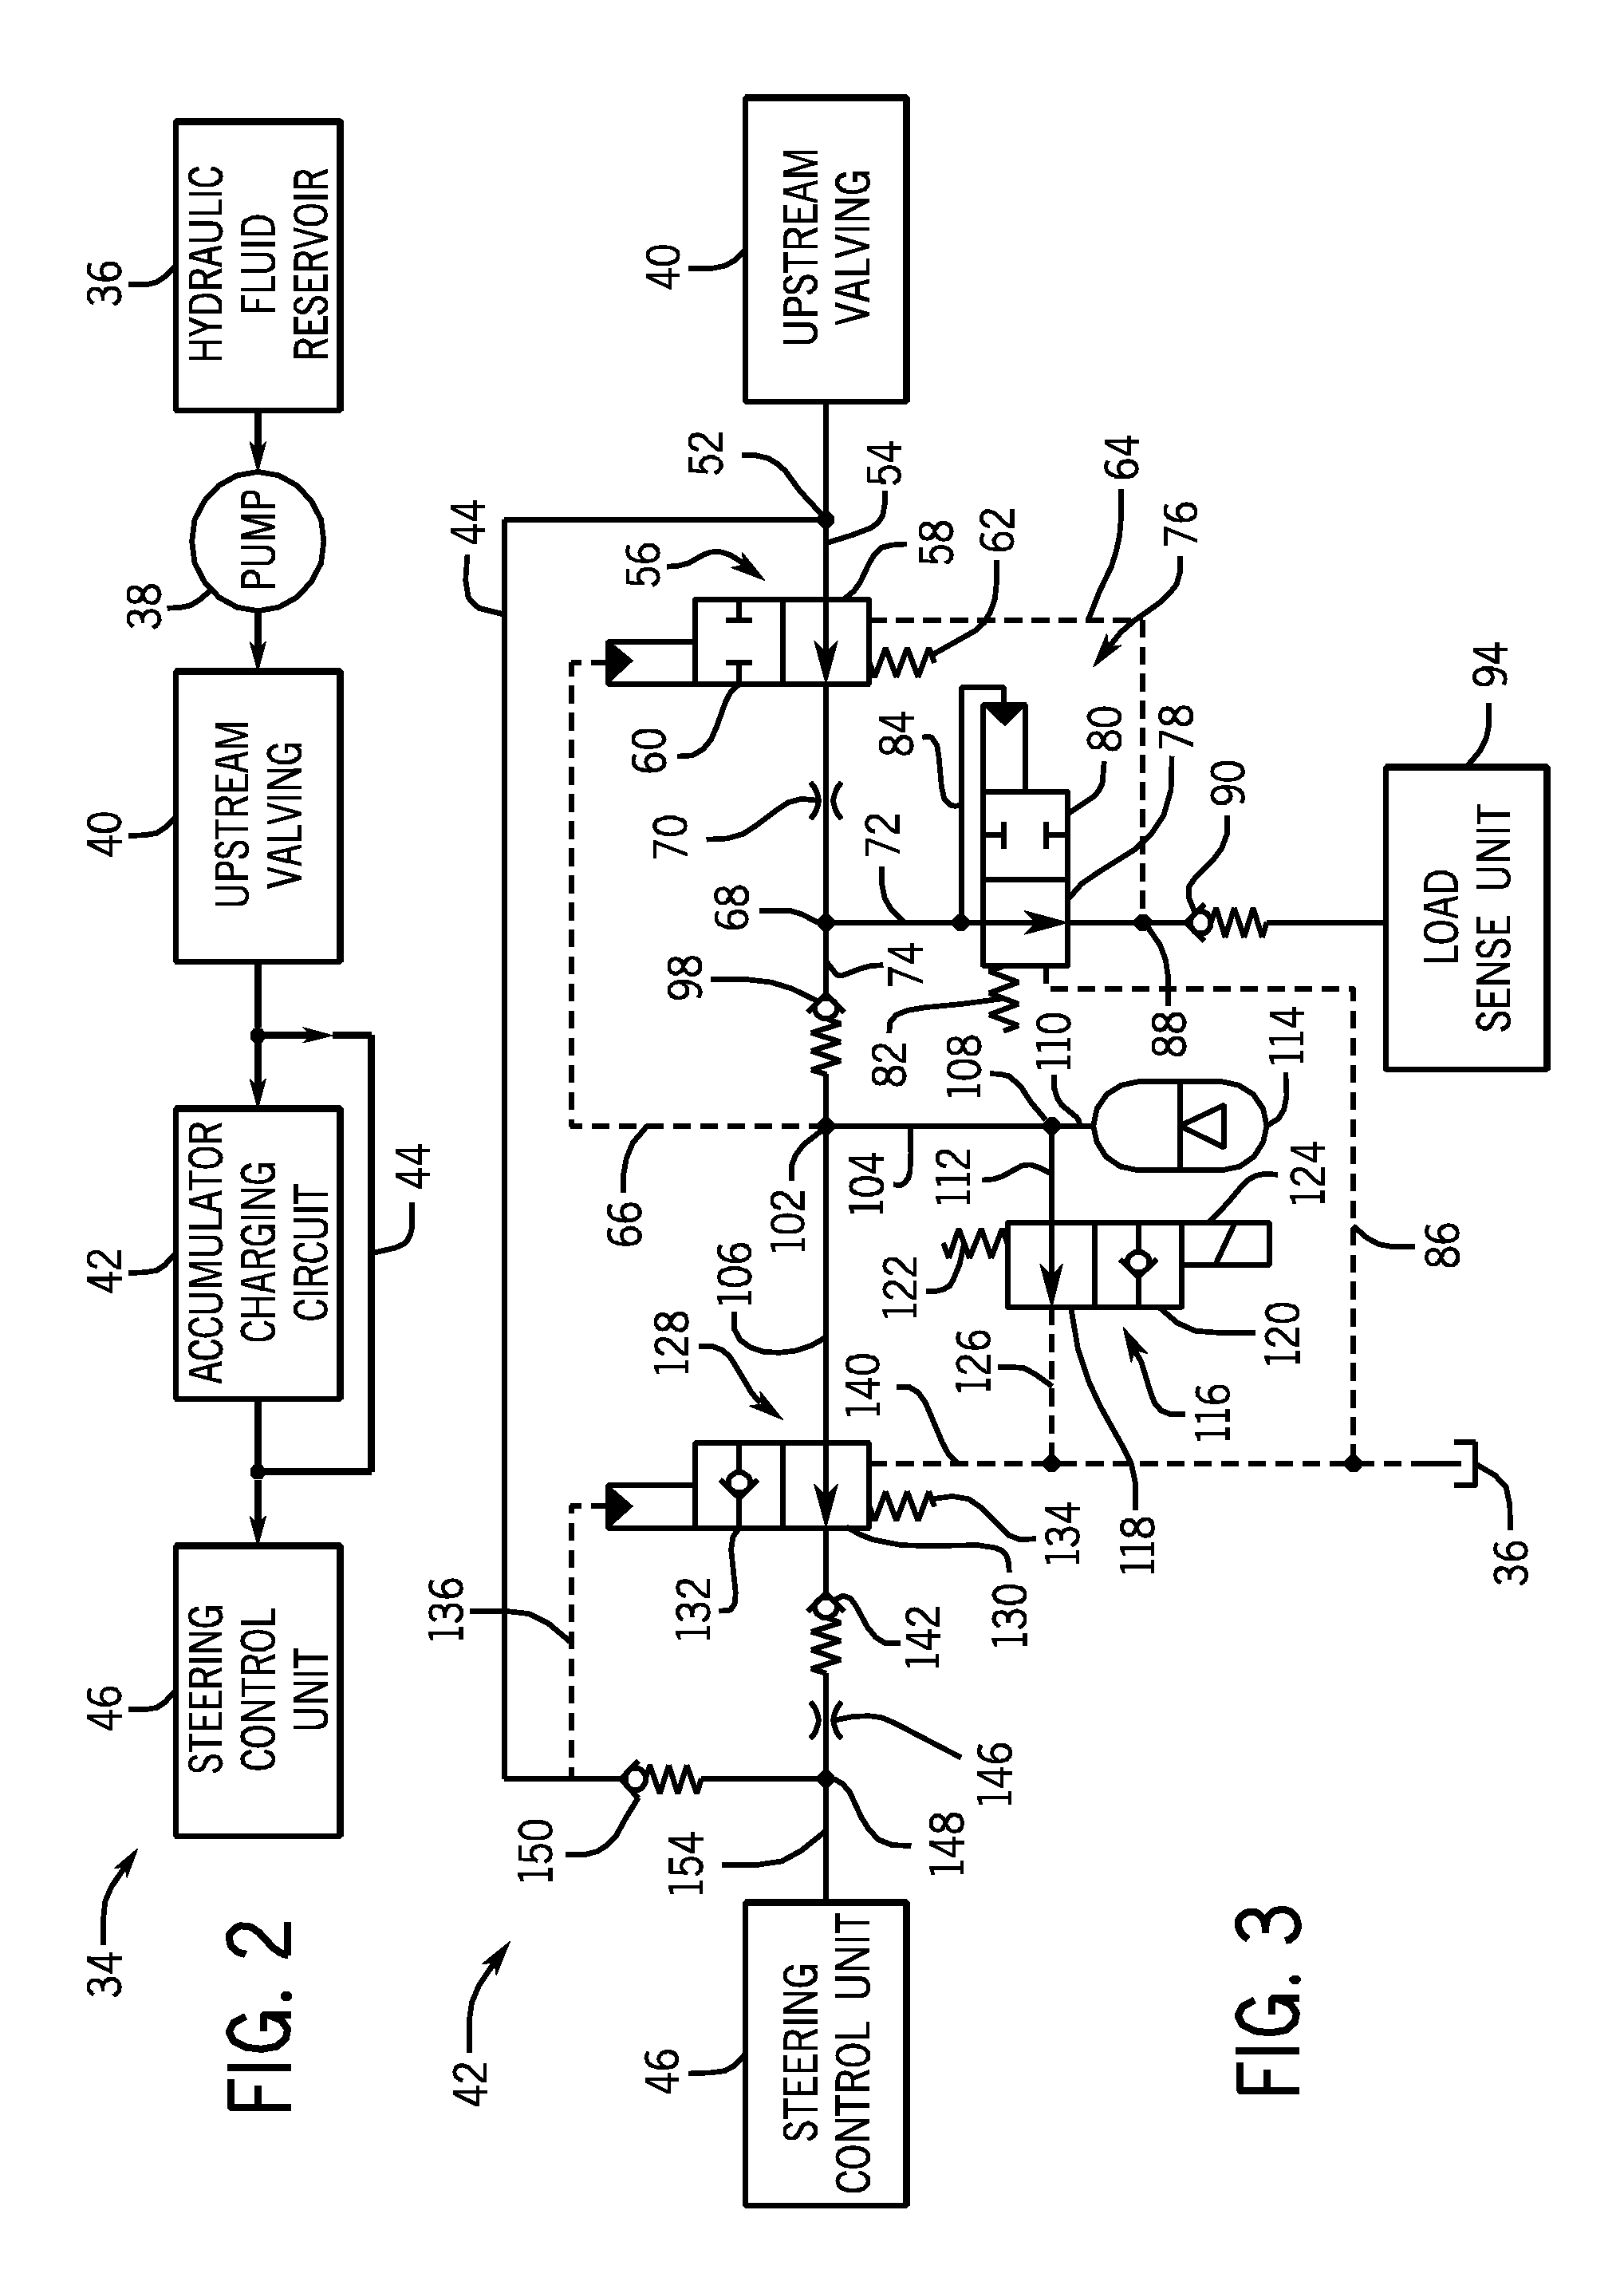 System and method for selectively charging and discharging a steering accumulator